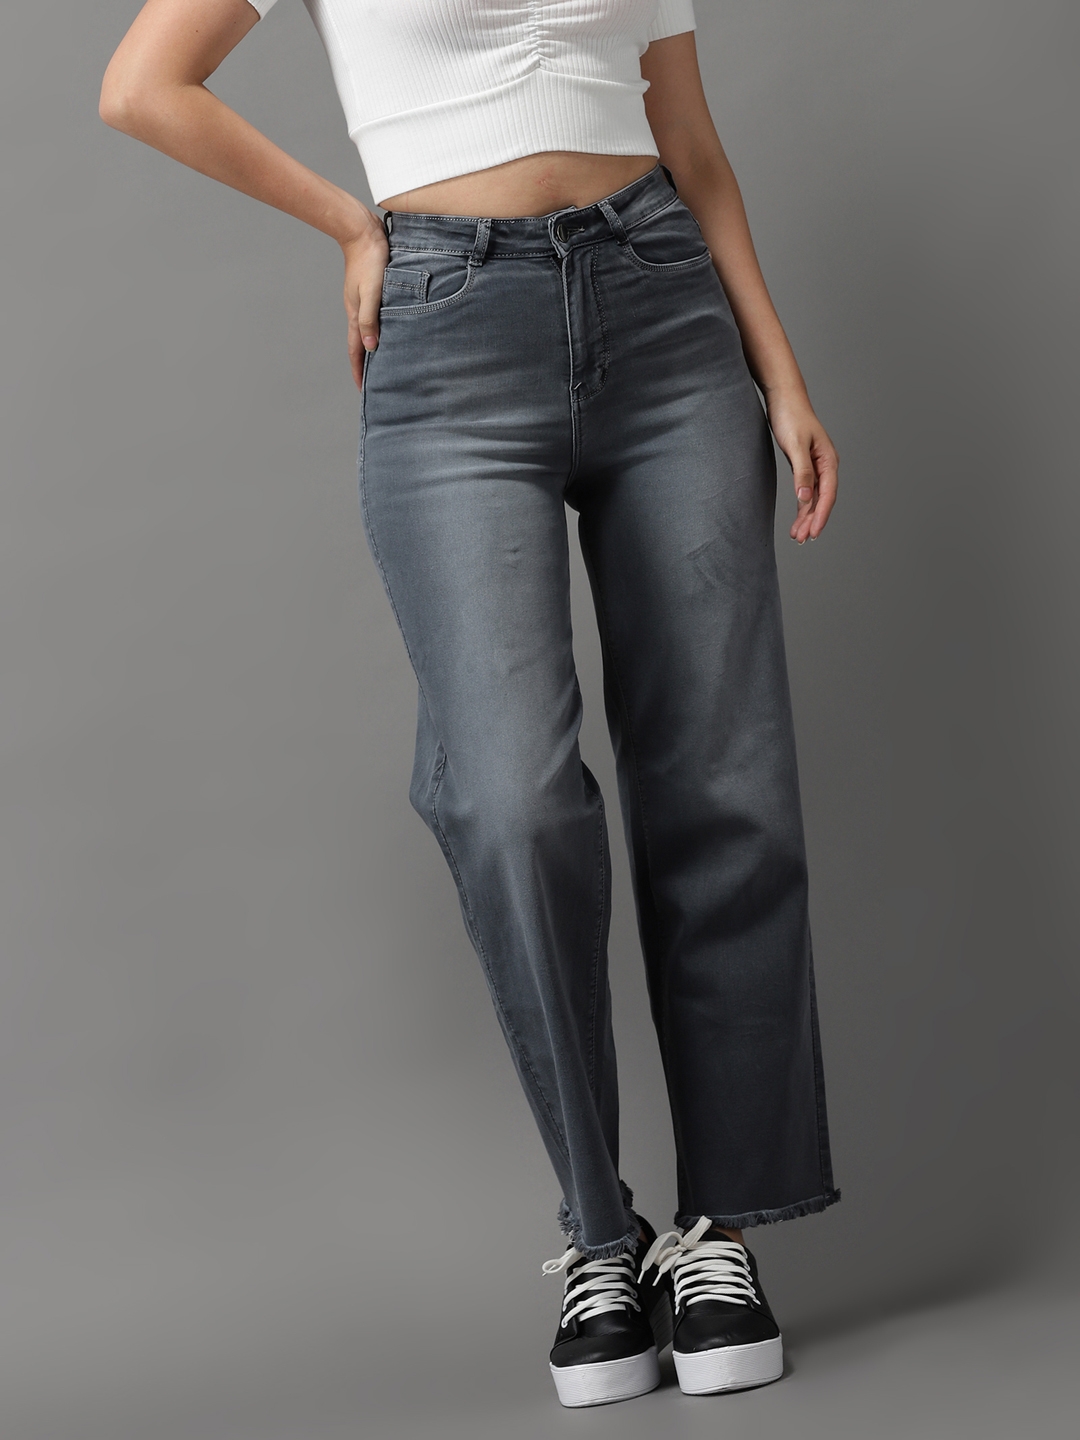 Showoff | SHOWOFF Women's High-Rise Grey Clean Look Jeans